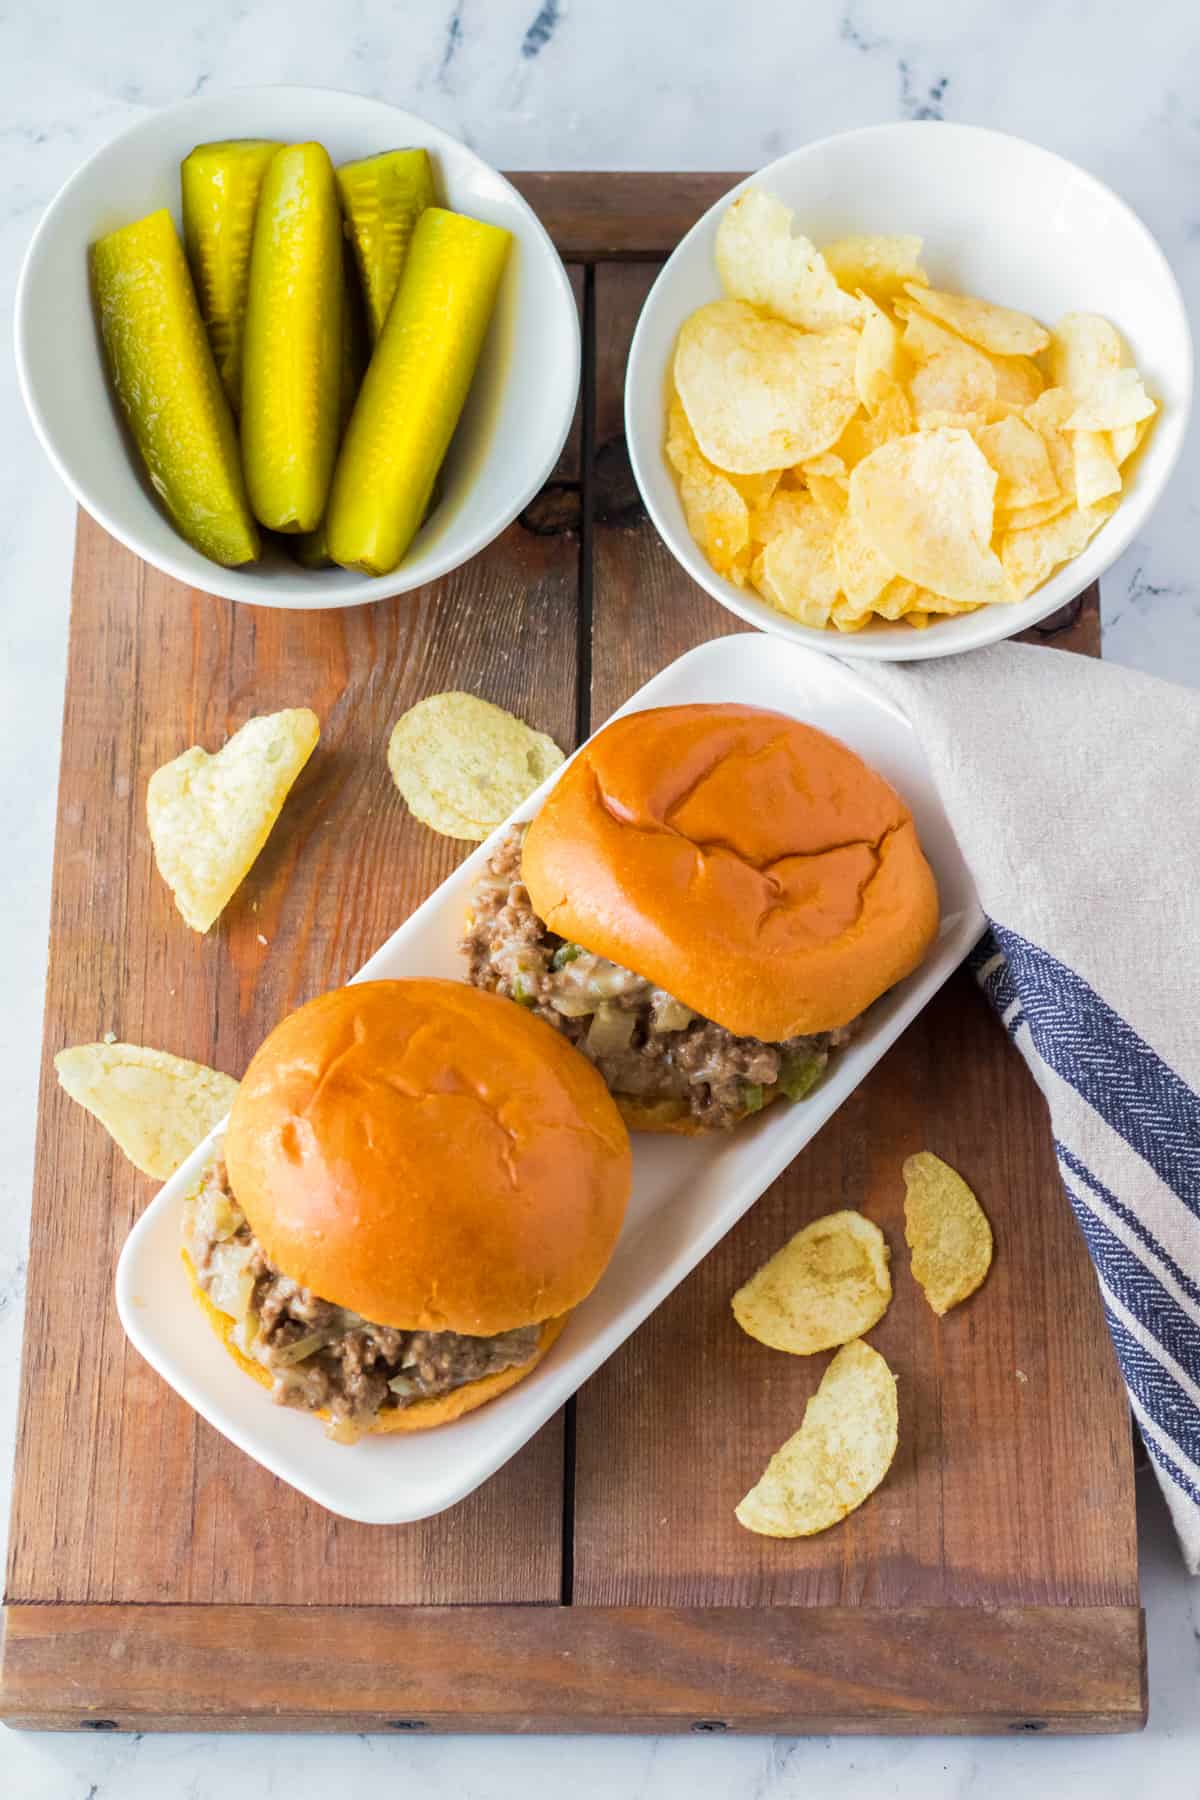 Slow cooker sloppy joes served on buns with potato chips and pickle spears.